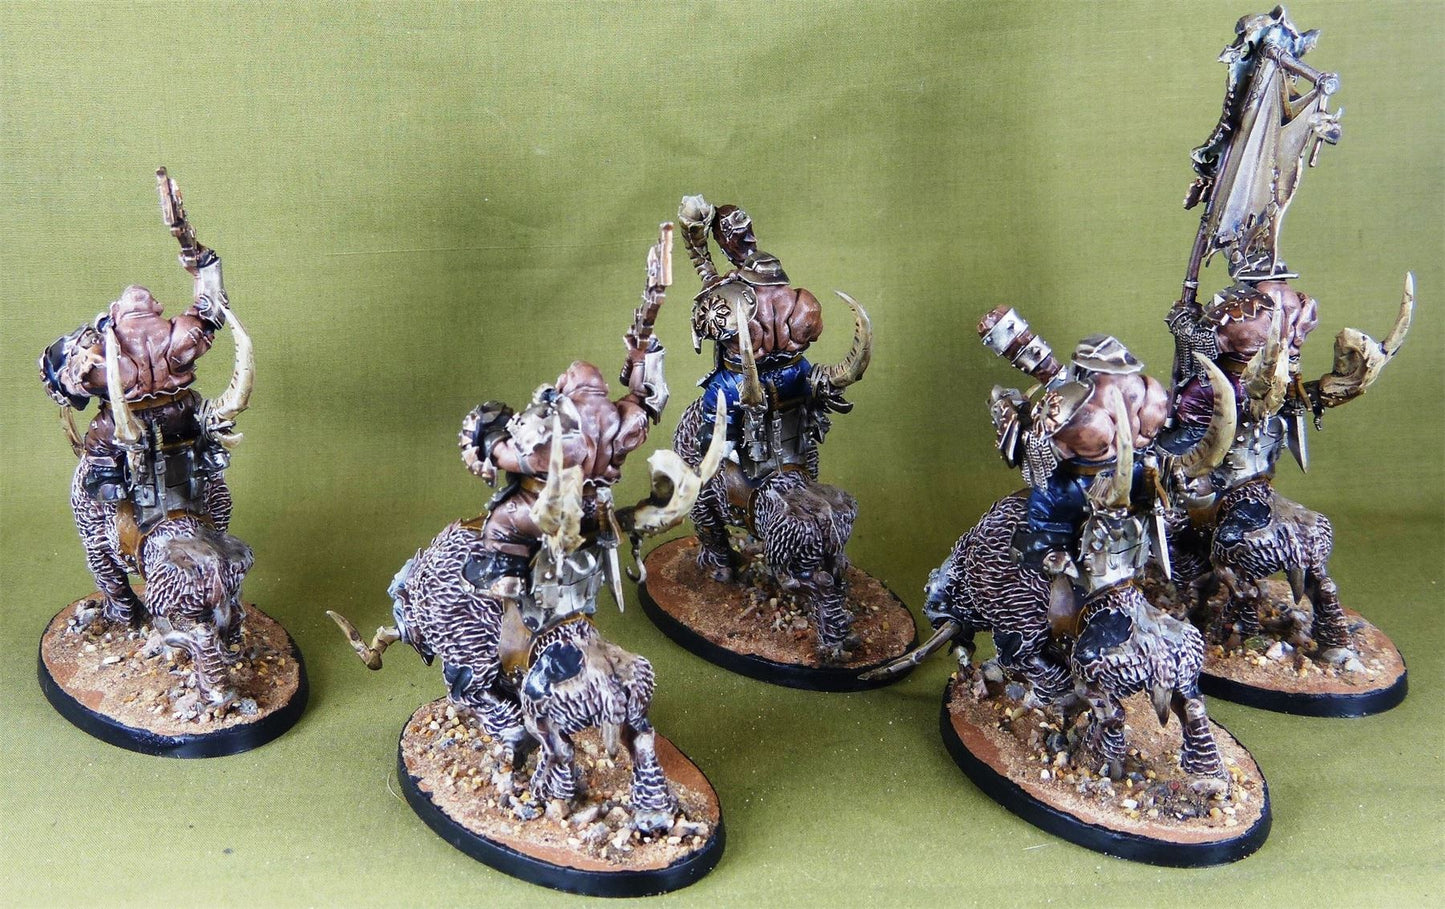 Mournfang Pack - Ogor Mawtribes - Painted - Warhammer AoS 40k #2SH